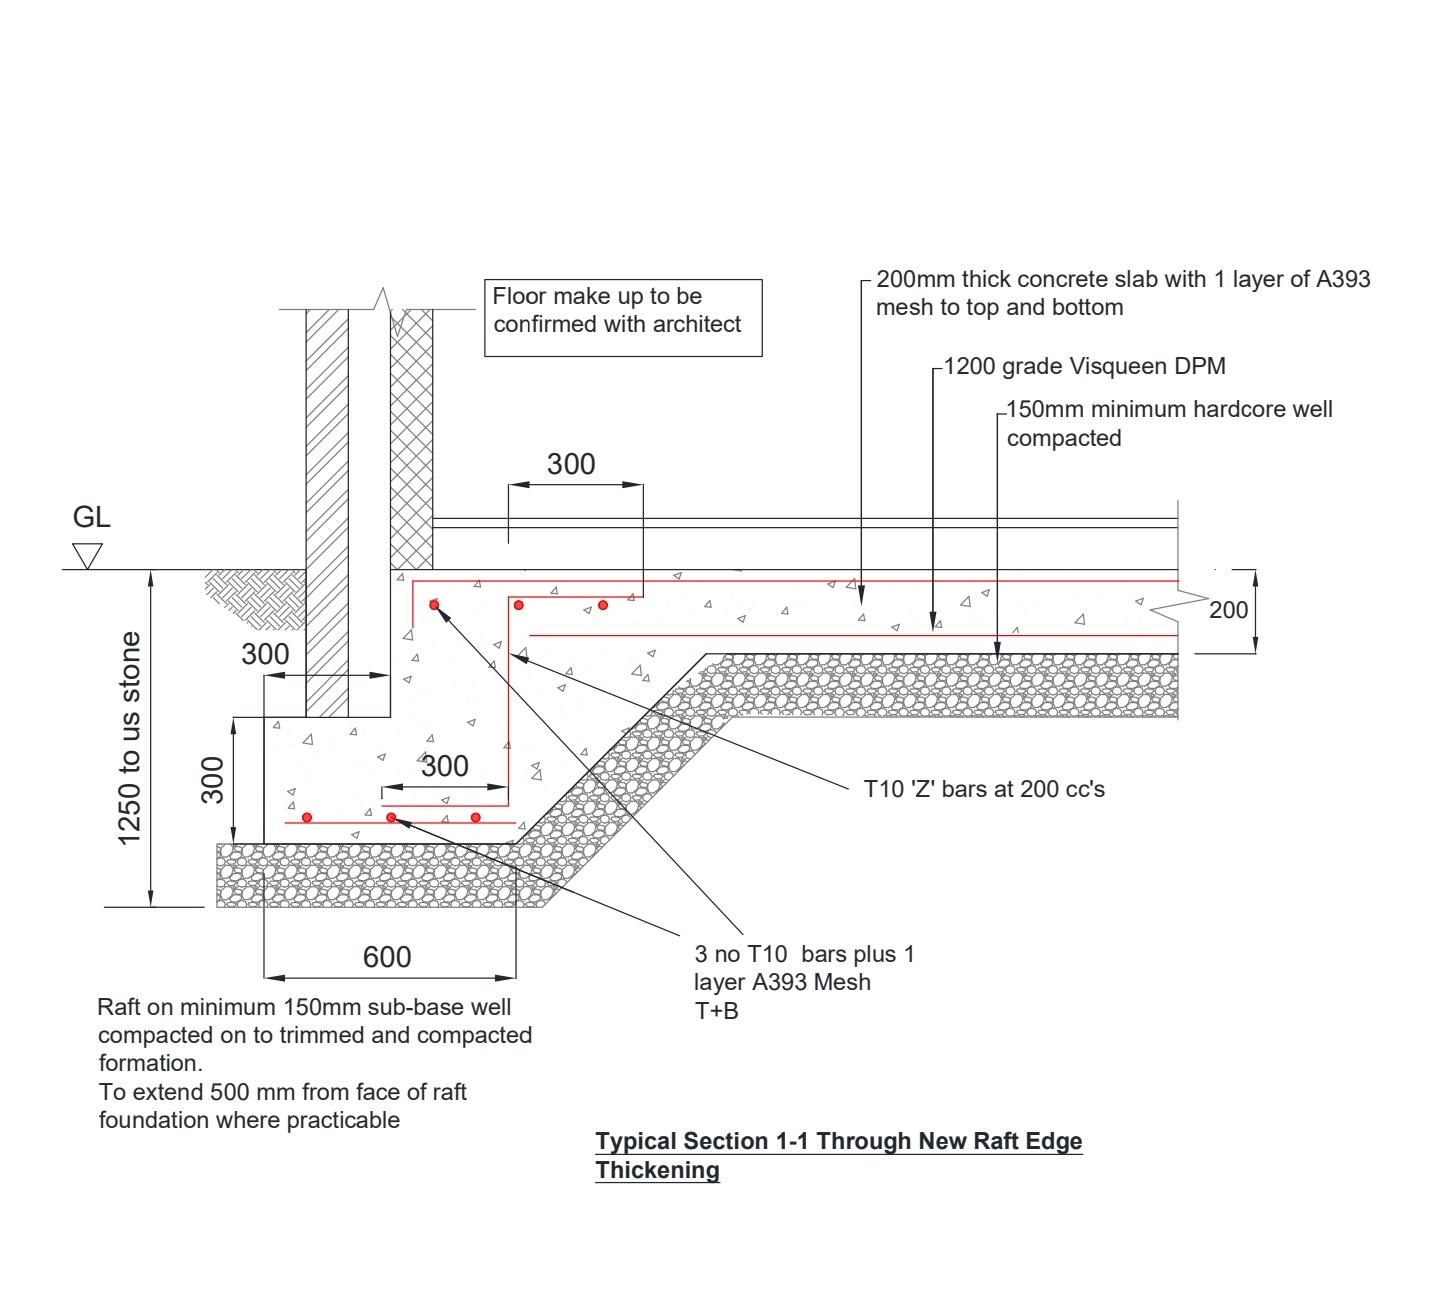 D Drawing Of Coffrage Foundation Layout Plan And Raft Footing Layout ...